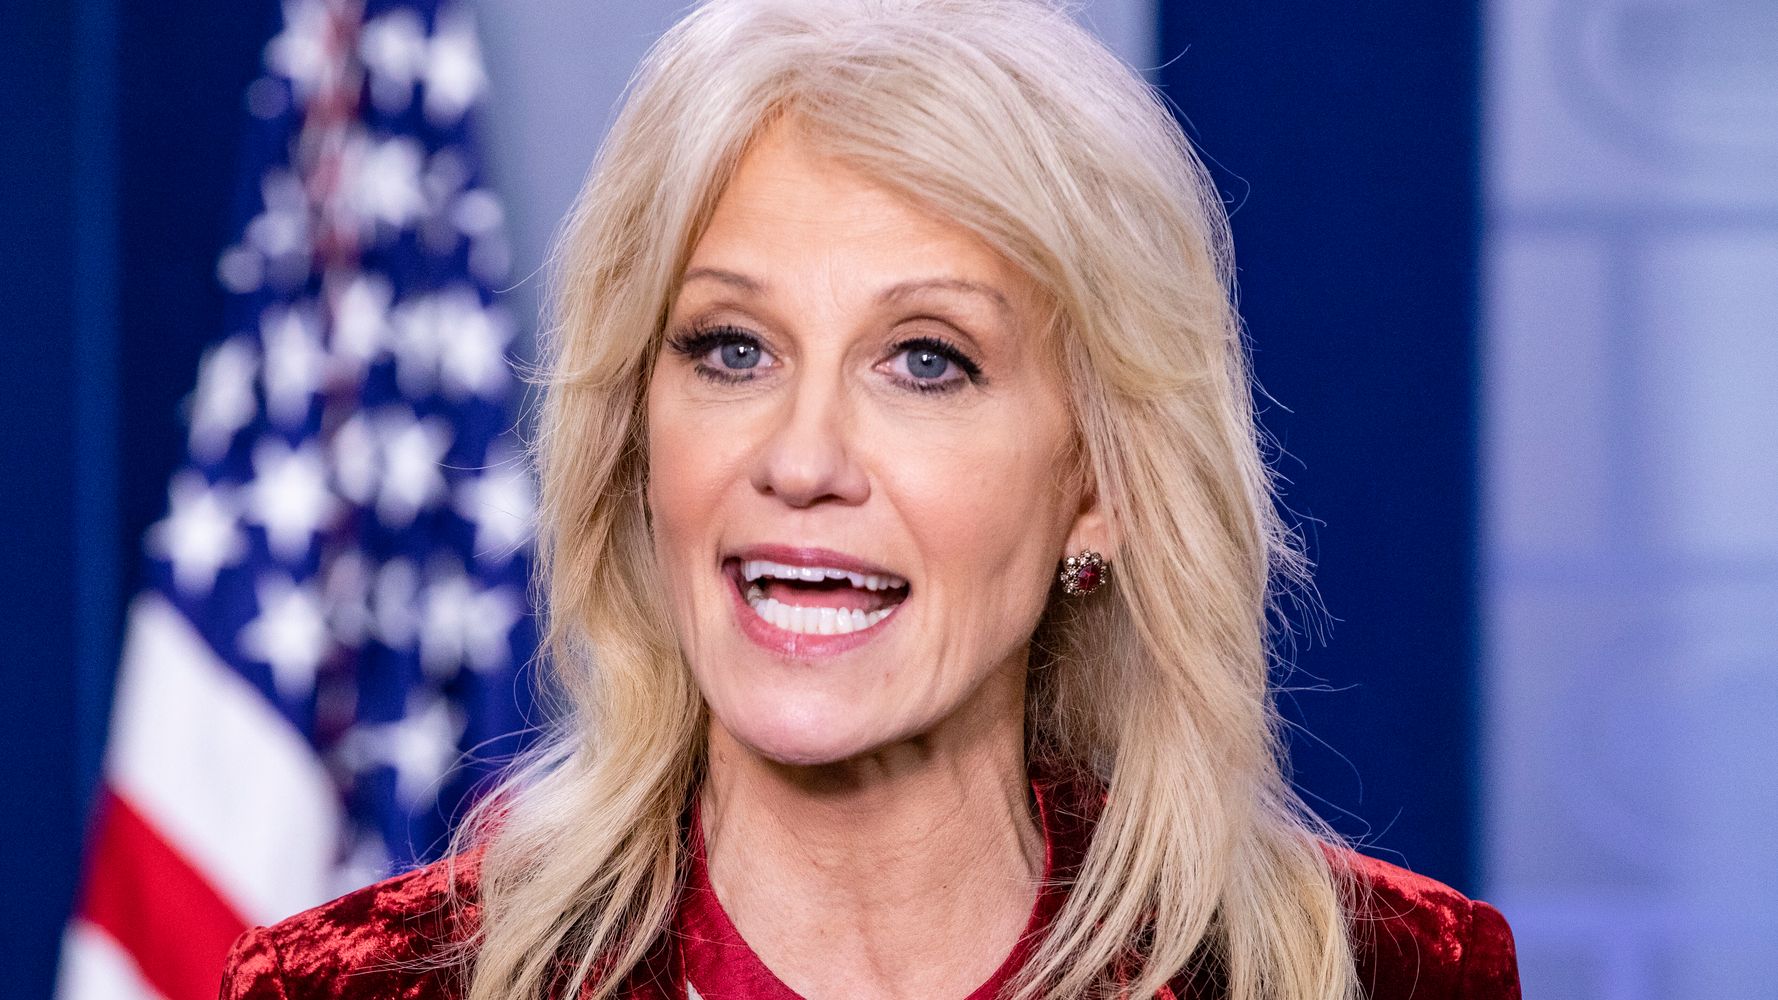 Kellyanne Conway Promotes Her Memoir And Everyone Makes The Same Damning Point